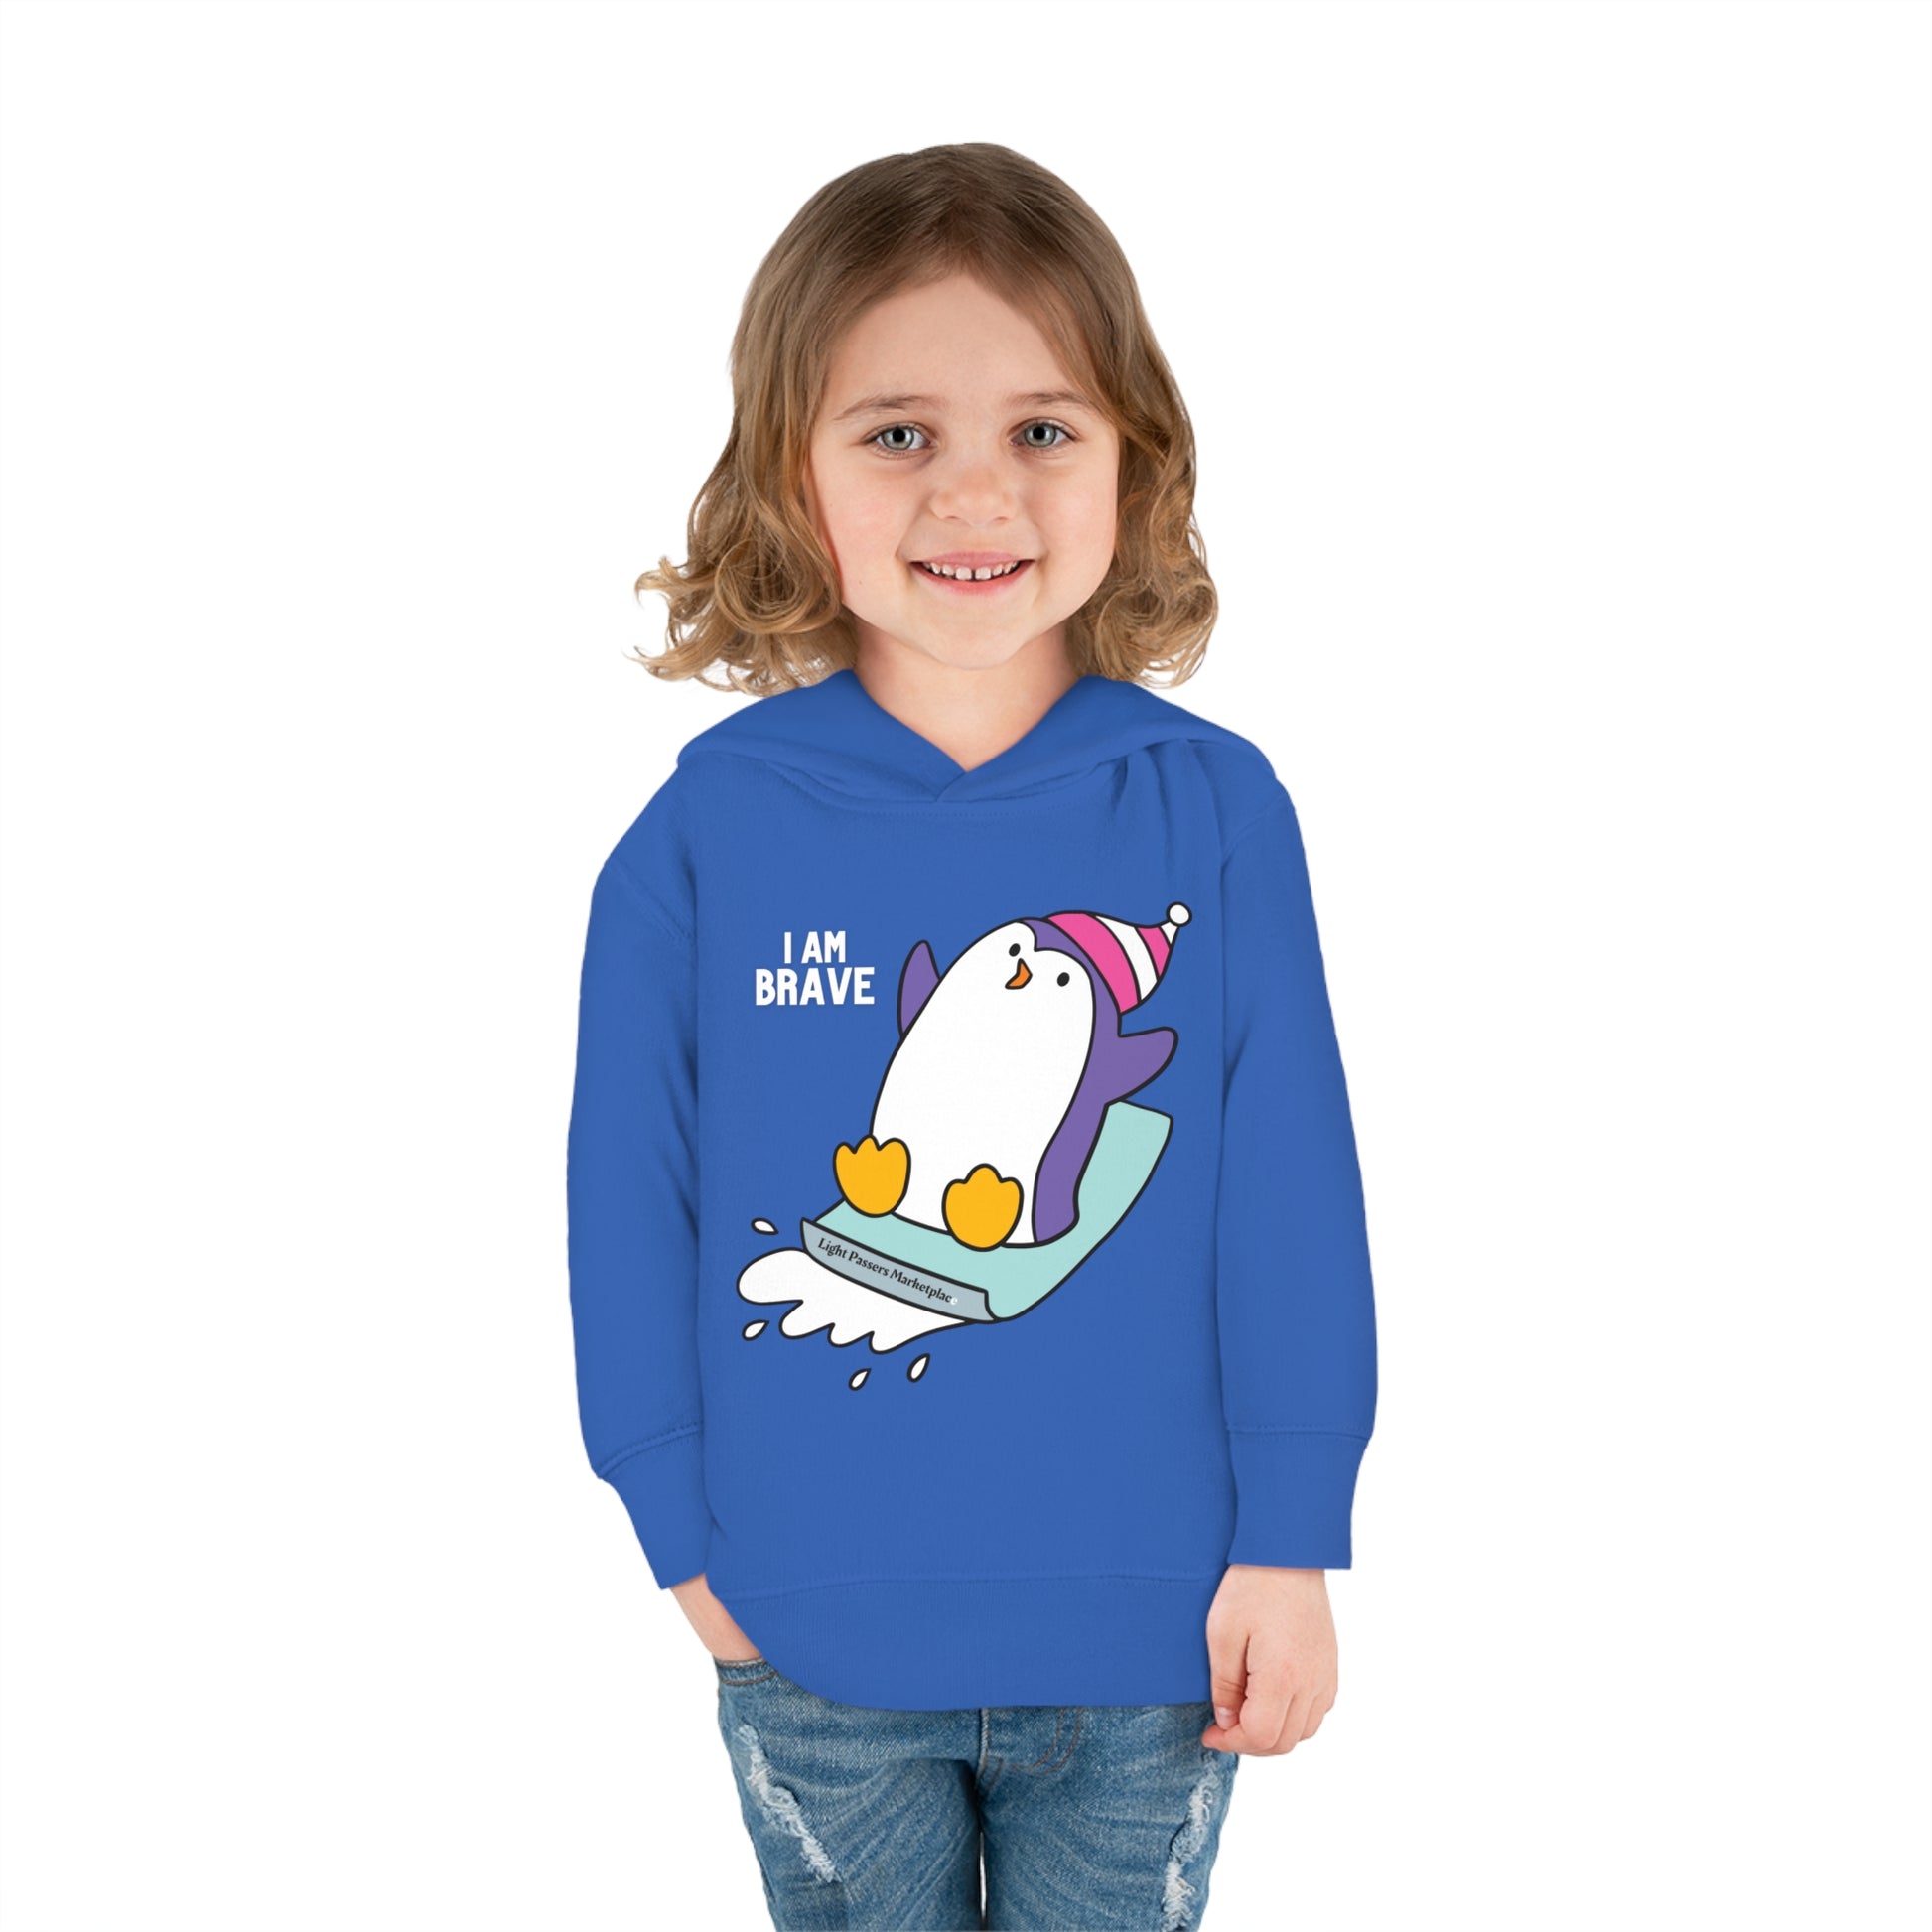 A child in a Rabbit Skins Brave Penguin Toddler Hooded Sweatshirt, smiling, with a penguin design, showcasing jersey-lined hood, cover-stitched details, and side seam pockets for cozy durability.